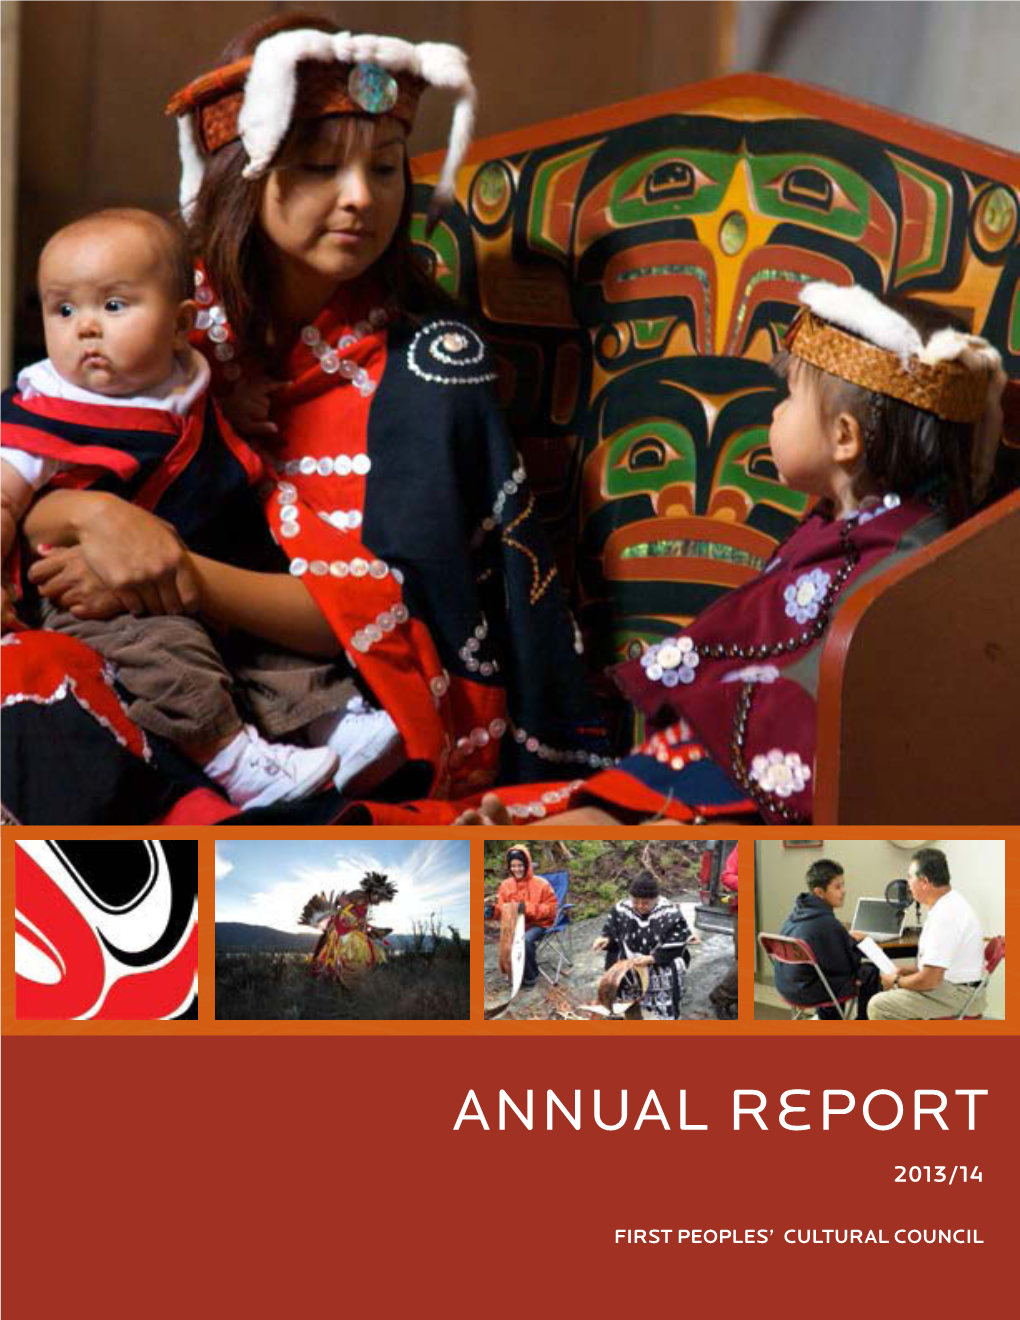 First Peoples' Cultural Council Annual Report 2013/14